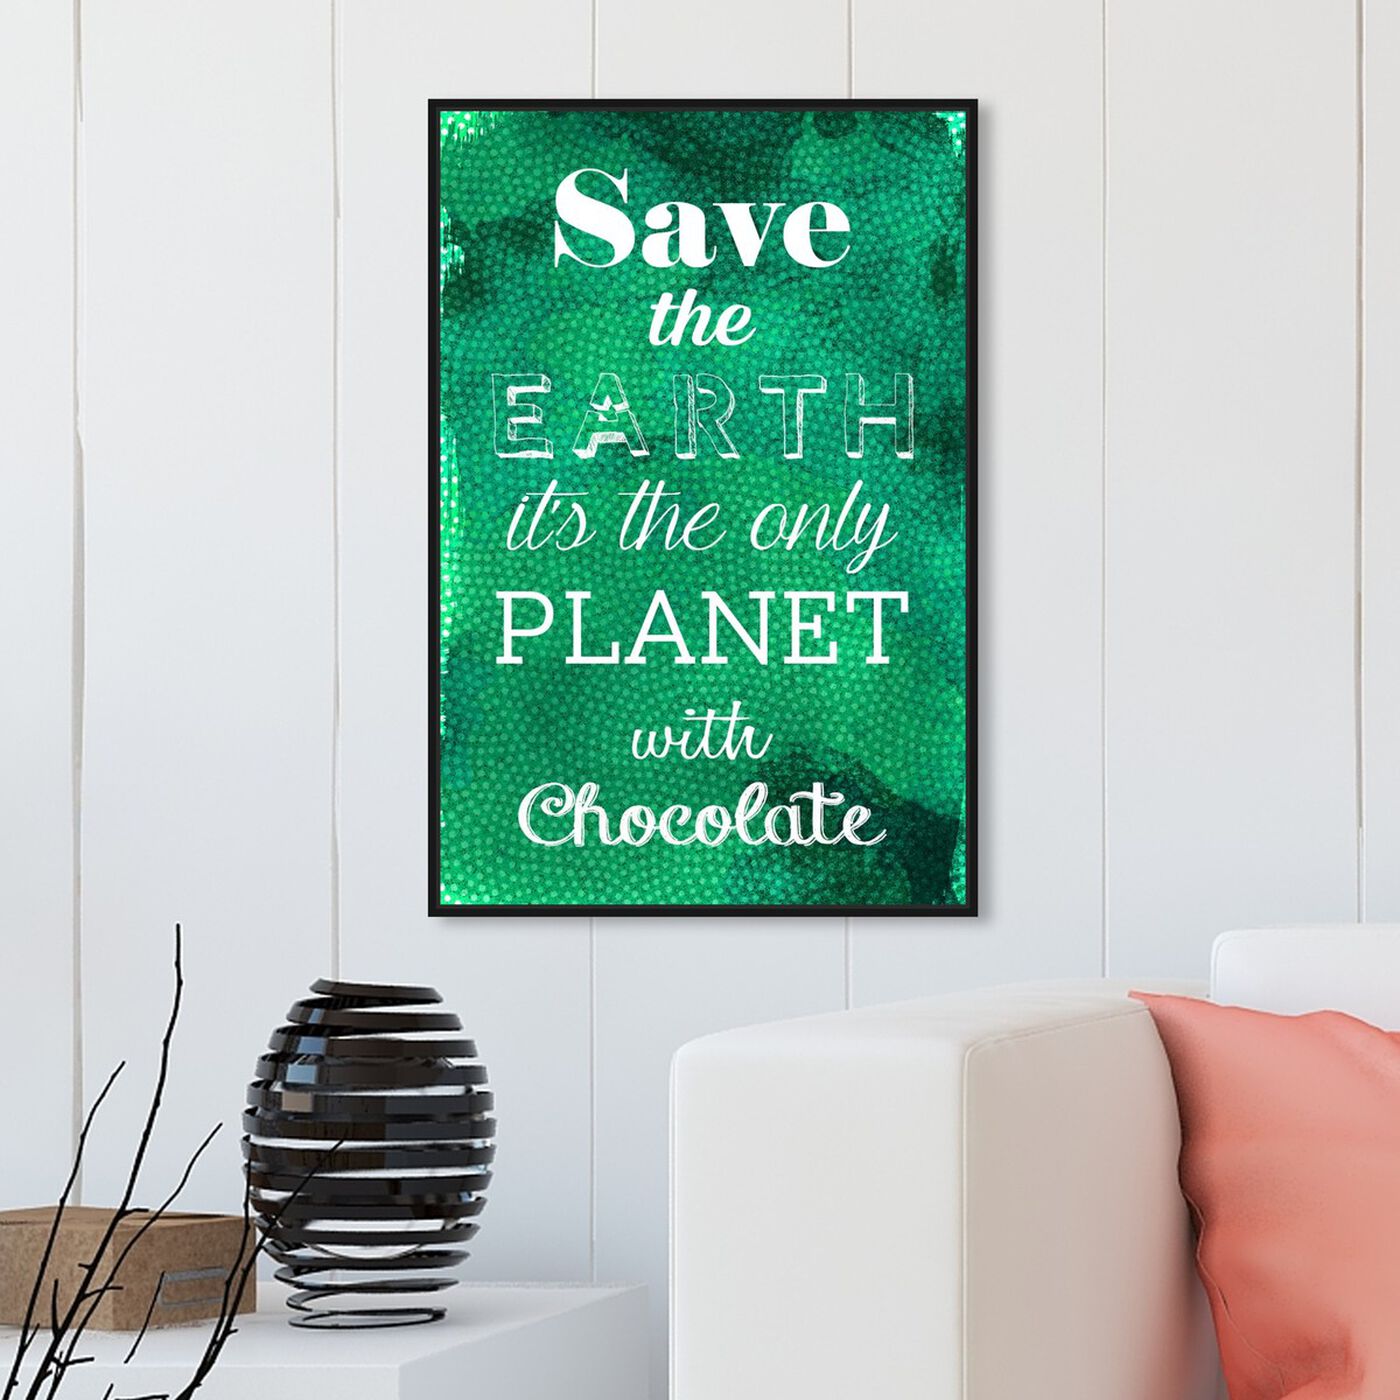 Hanging view of Chocolate Planet featuring typography and quotes and funny quotes and sayings art.